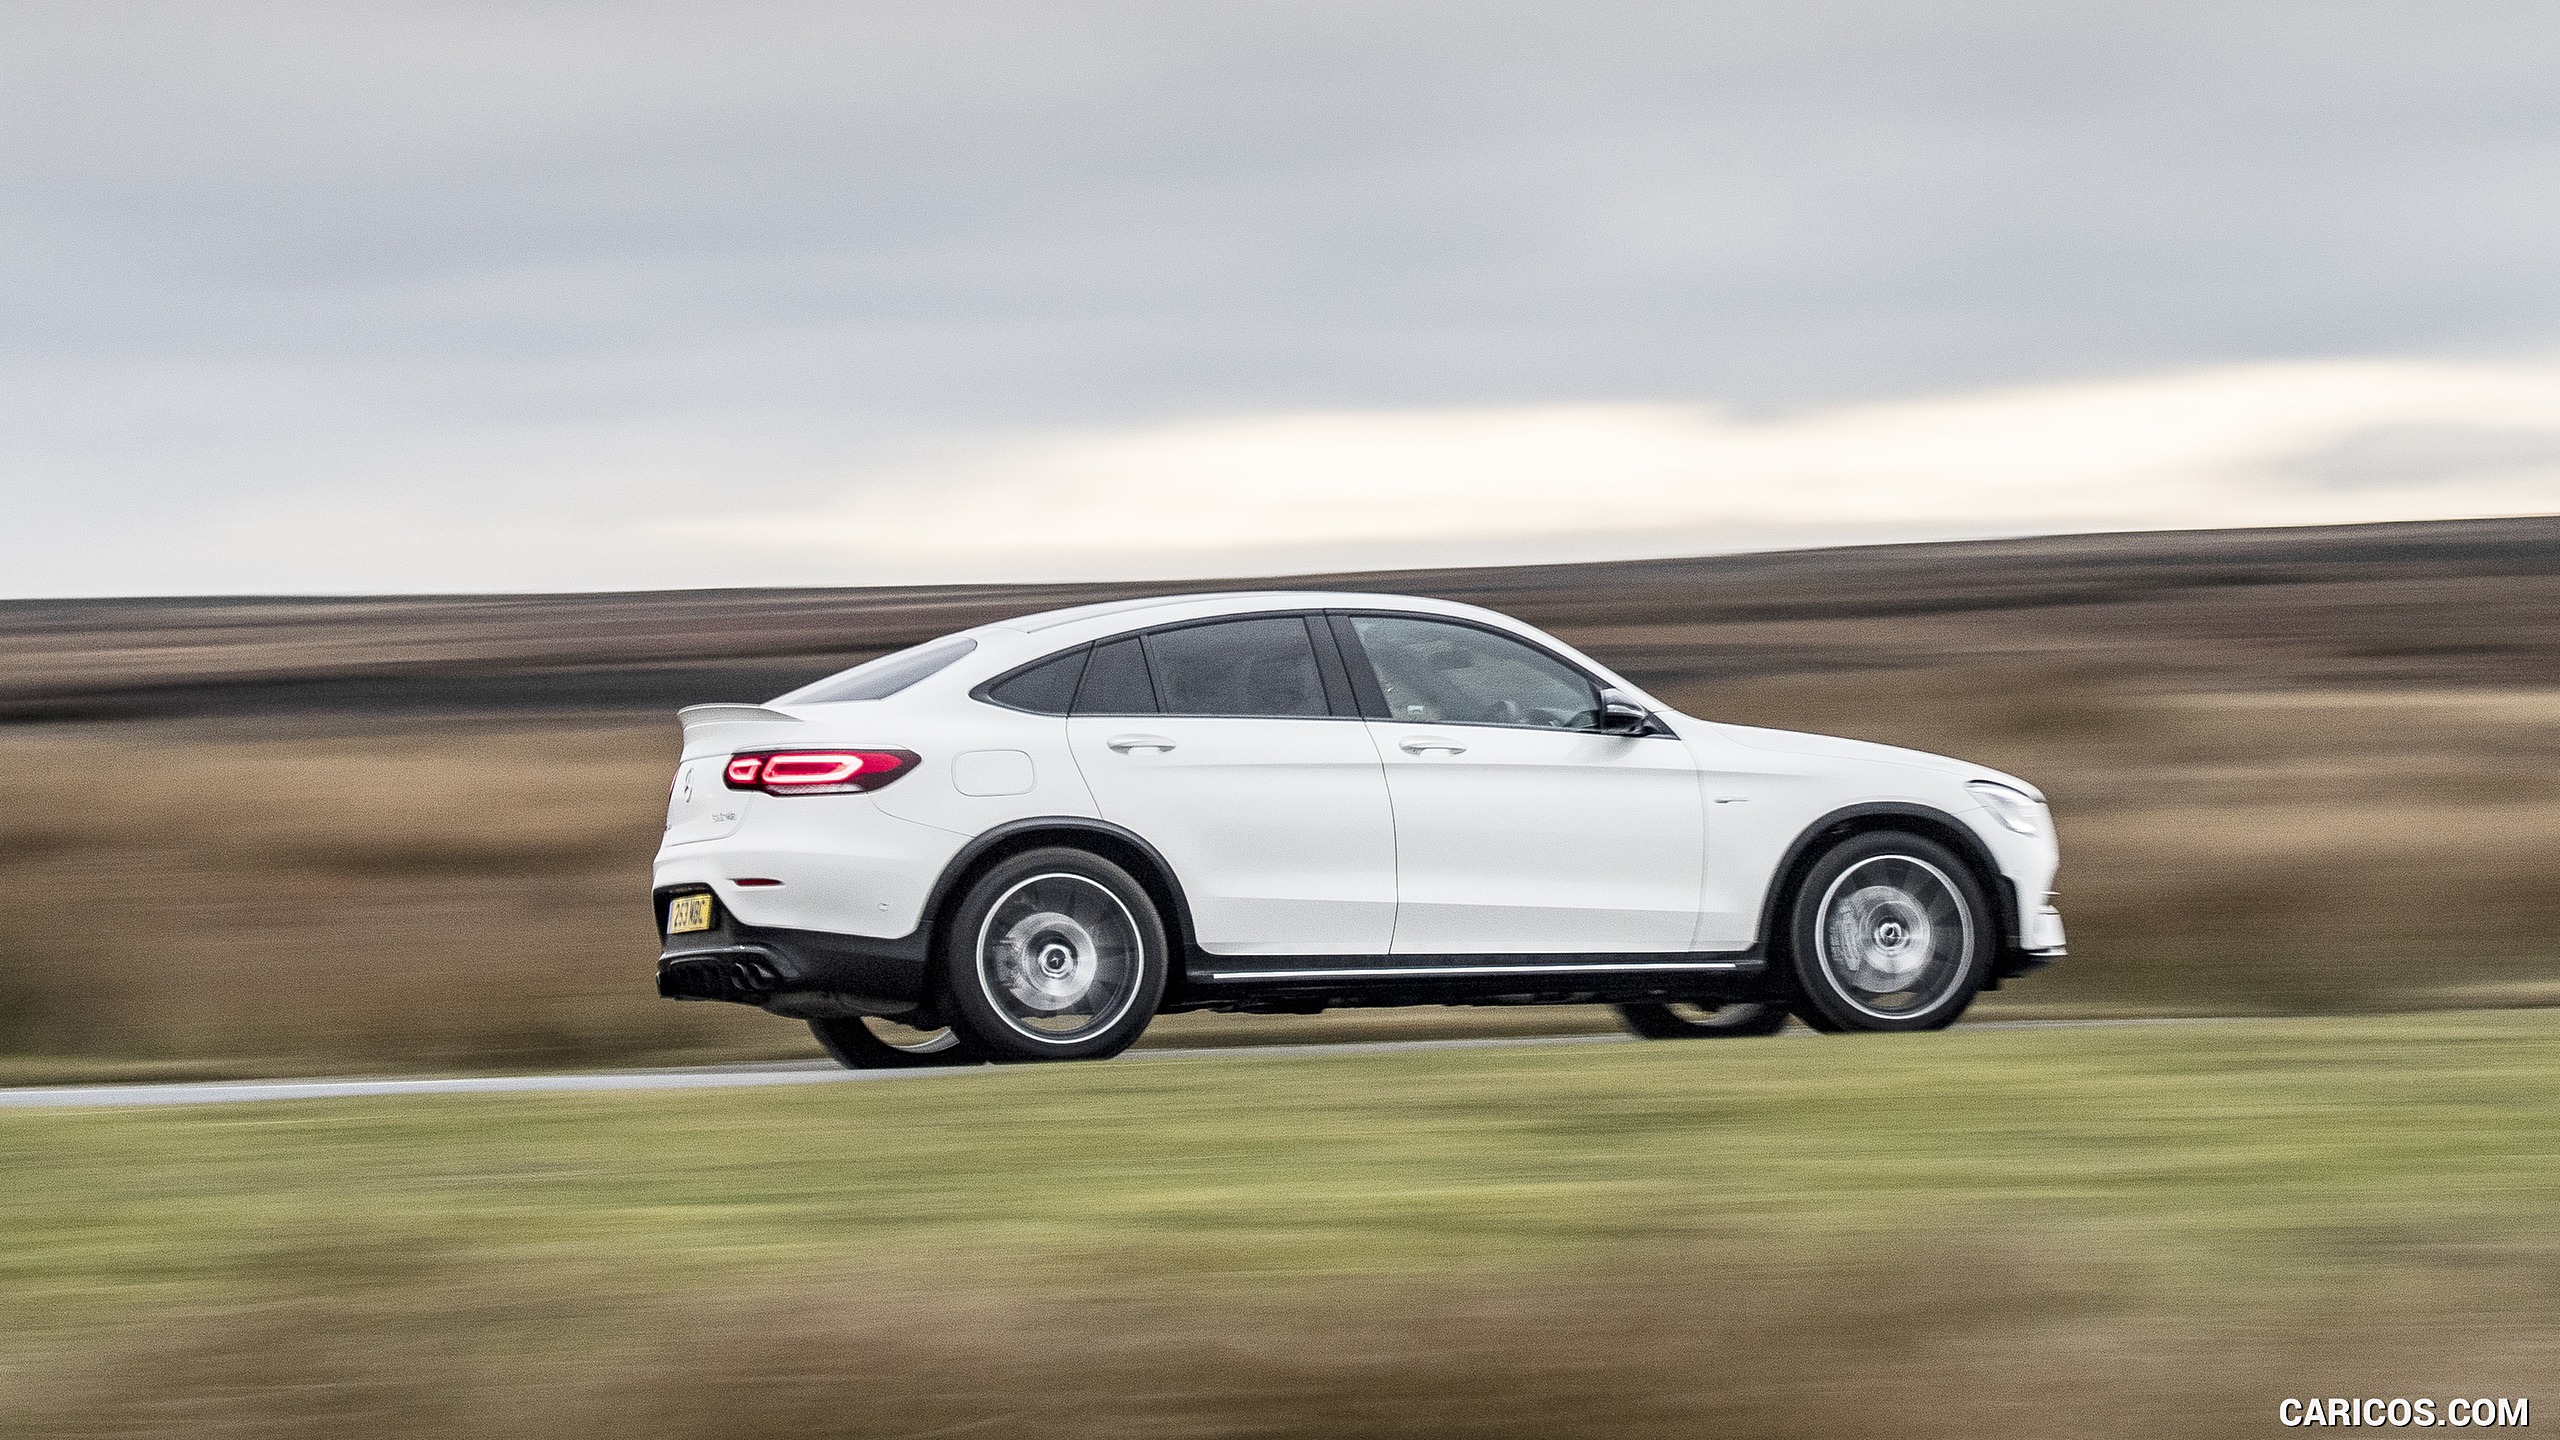 2020 Mercedes-AMG GLC 43 Coupe (UK-Spec) - Side, #65 of 173